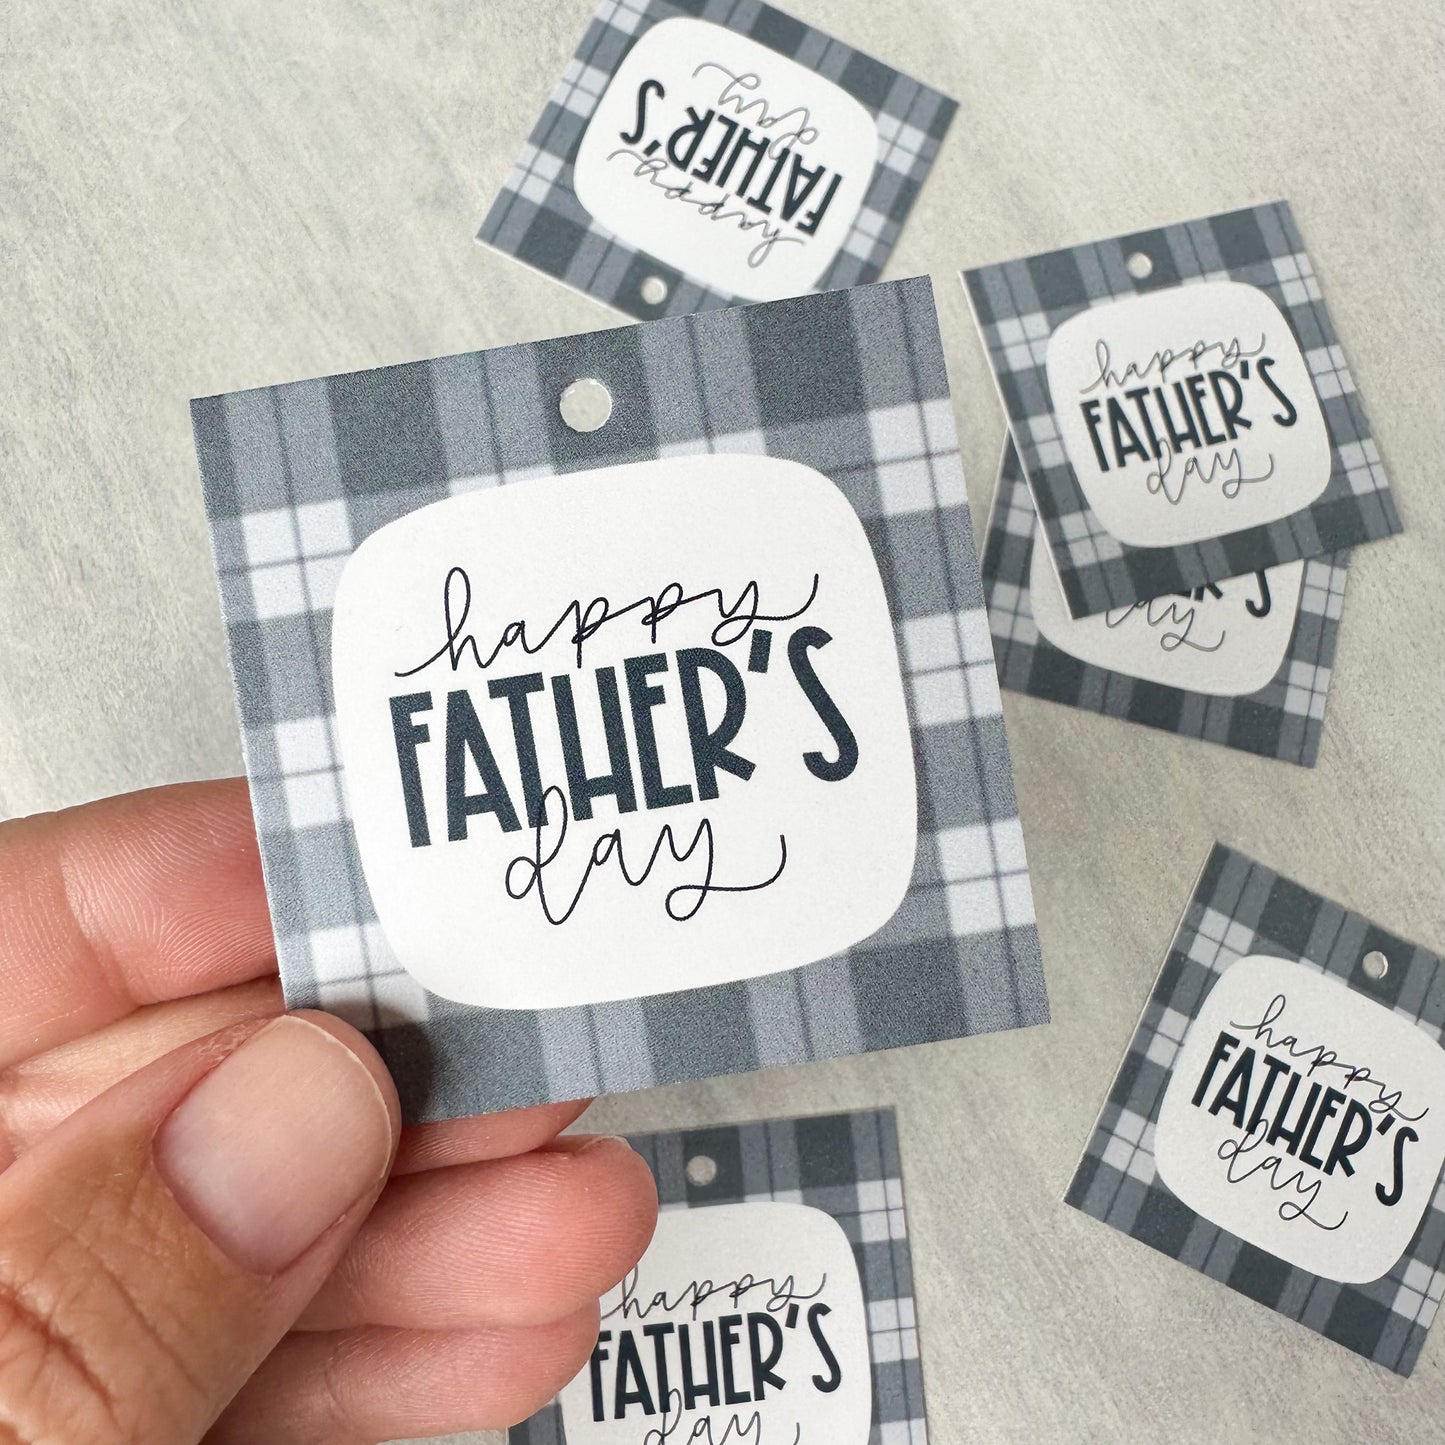 Happy Father's Day 2” x 2” Printed Tags: Set of 25